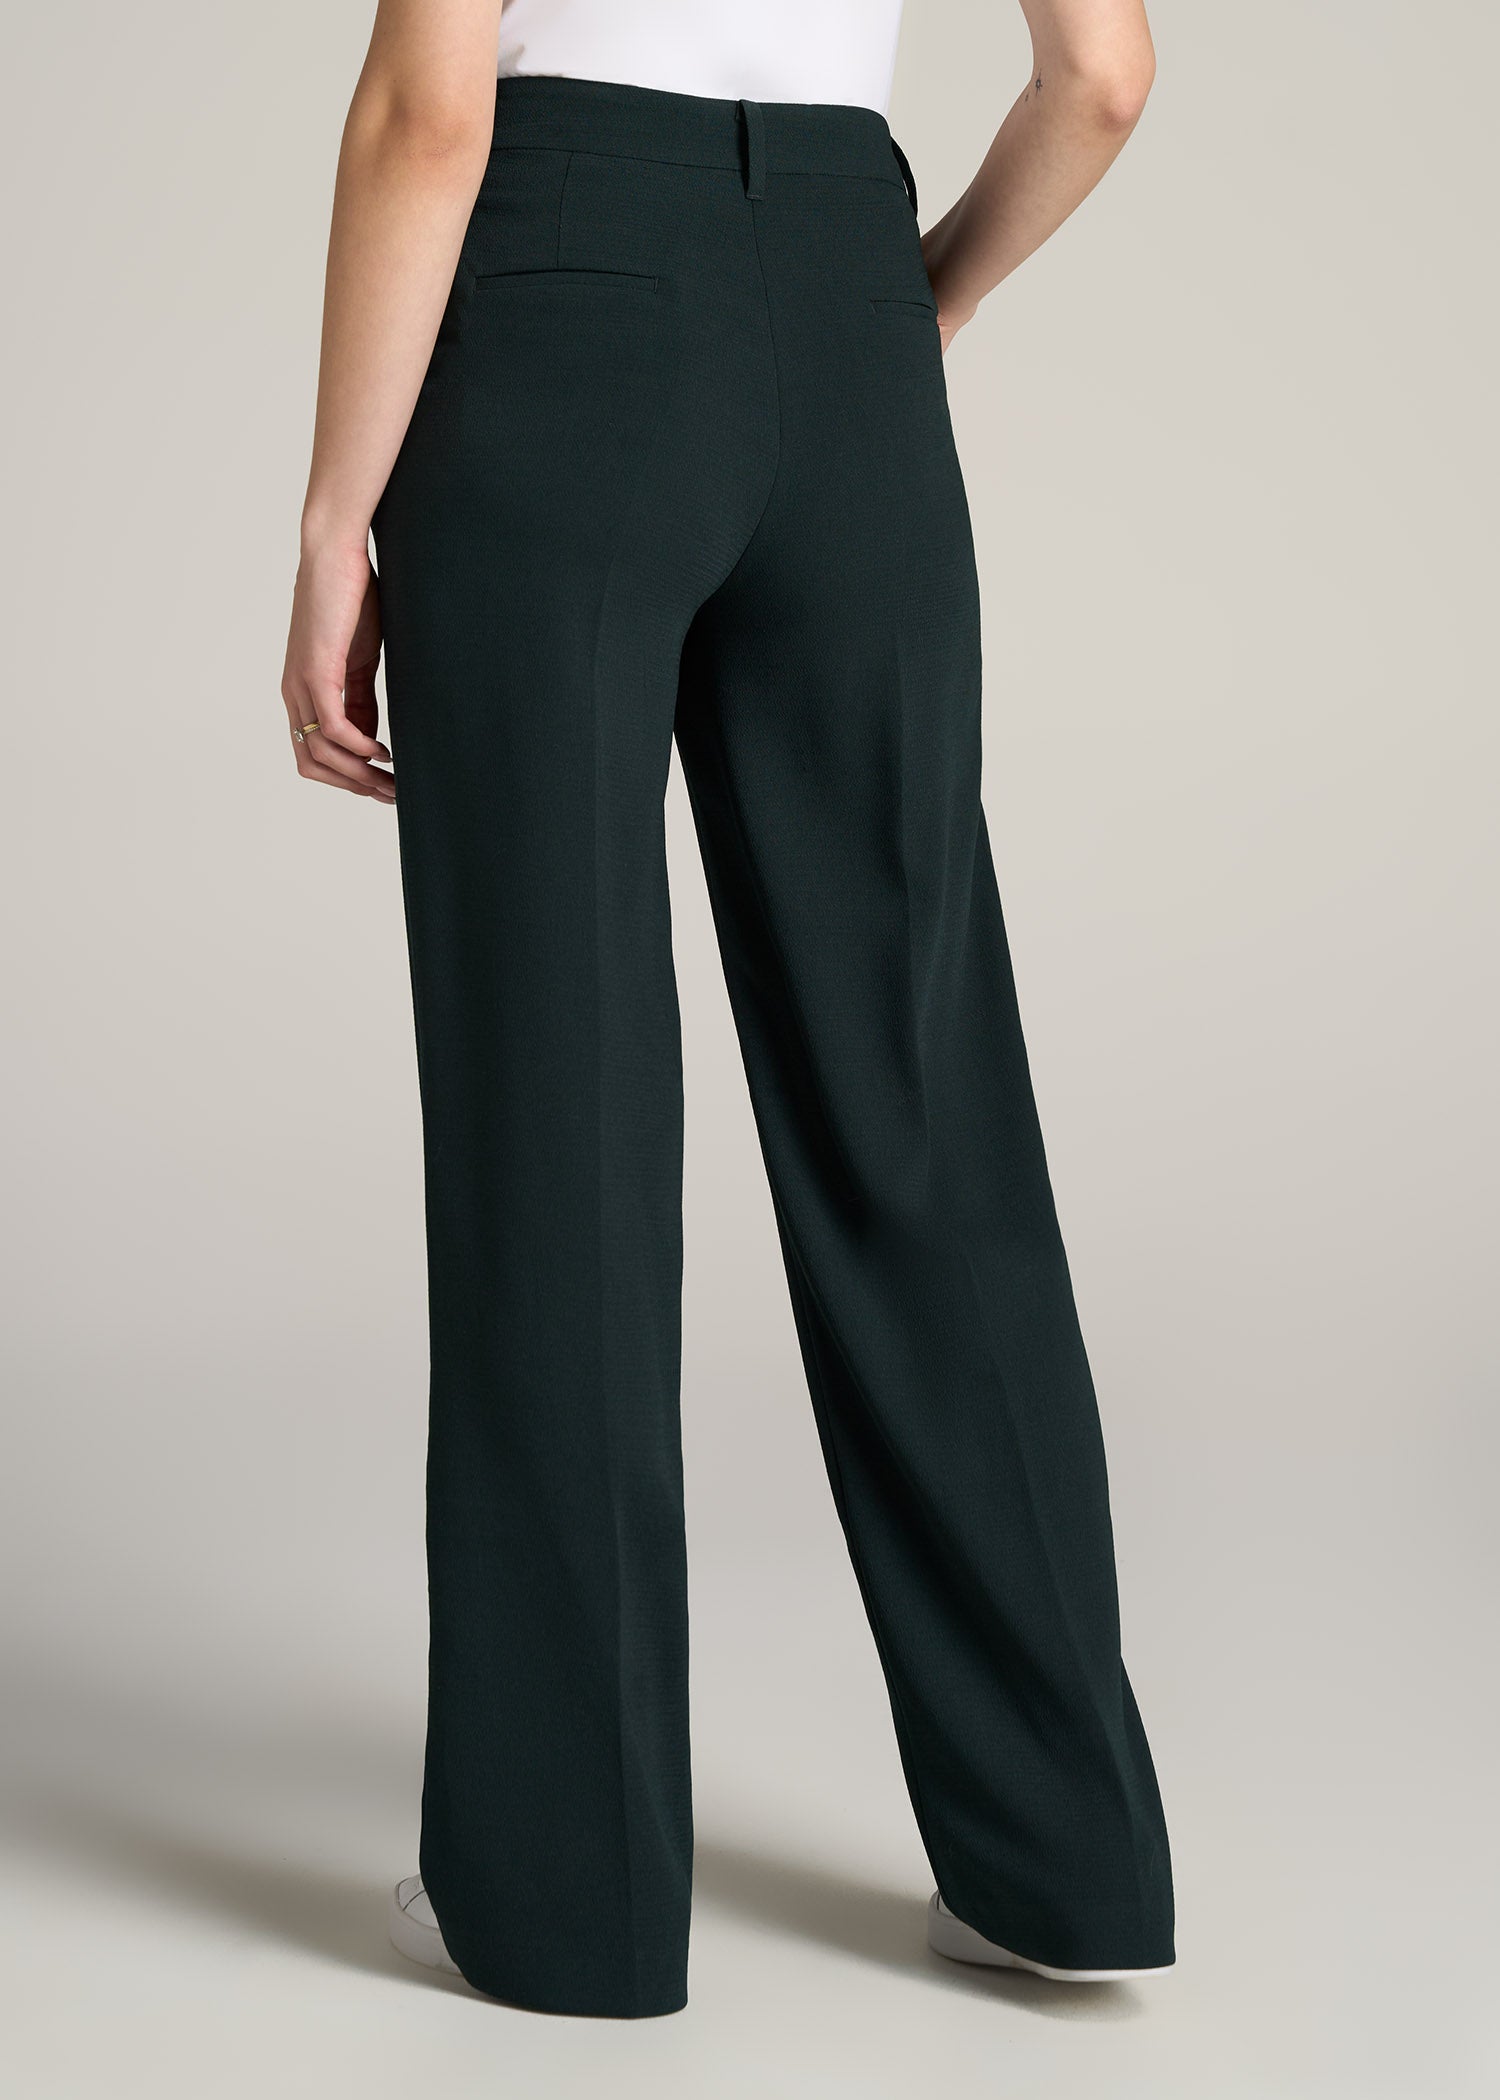 I want those pants!  Plus size vintage, Pleated pants outfit